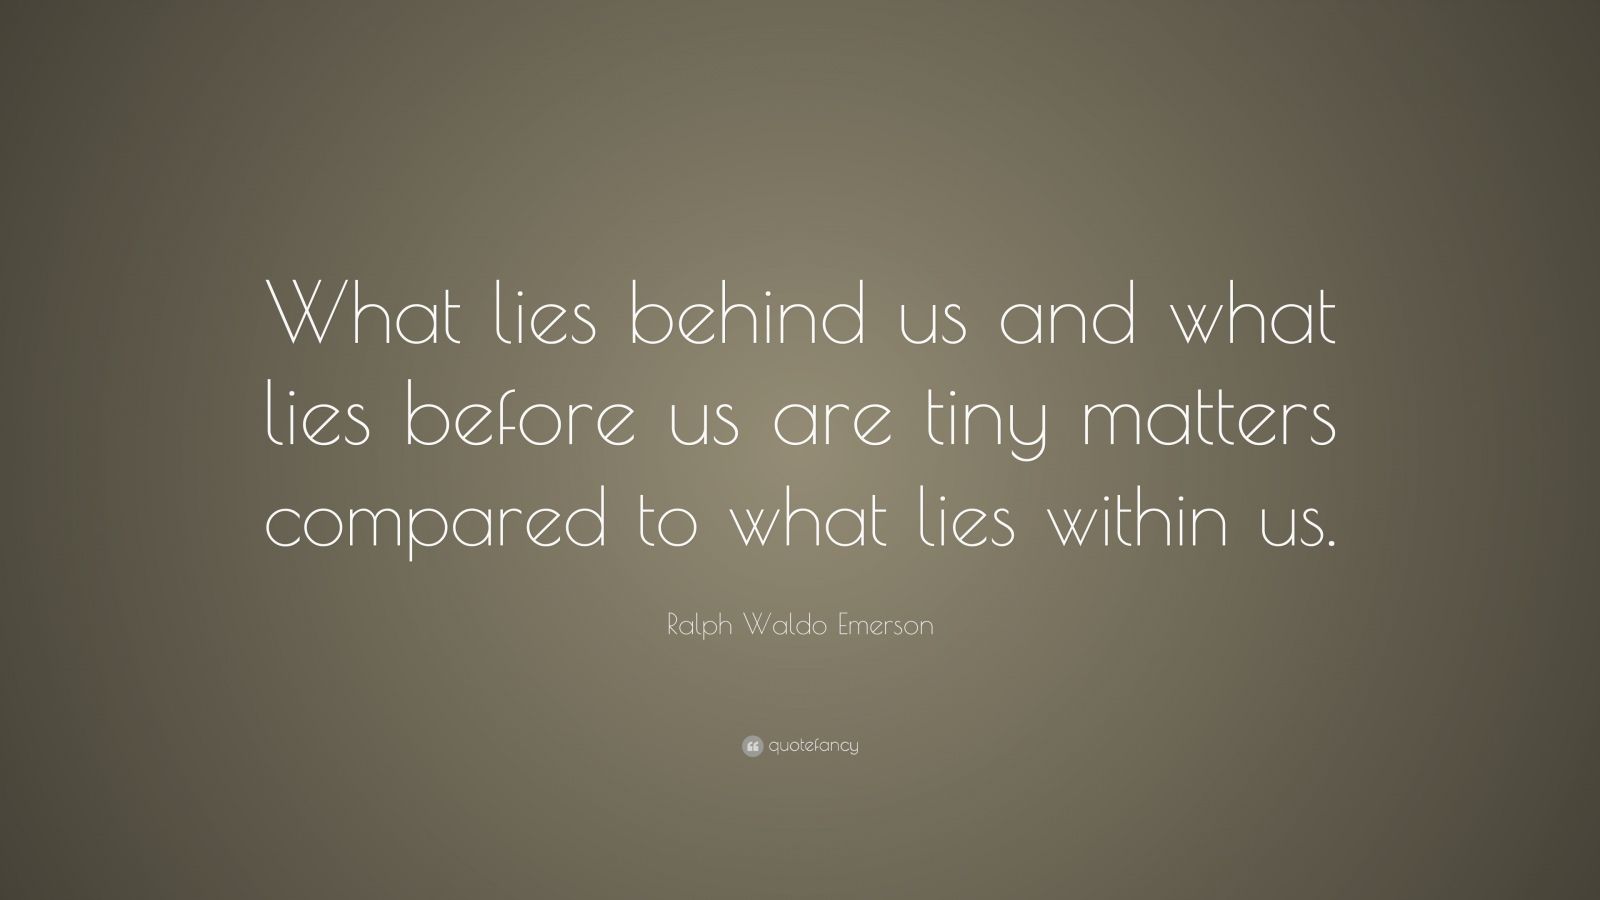 Ralph Waldo Emerson Quote “what Lies Behind Us And What Lies Before Us Are Tiny Matters